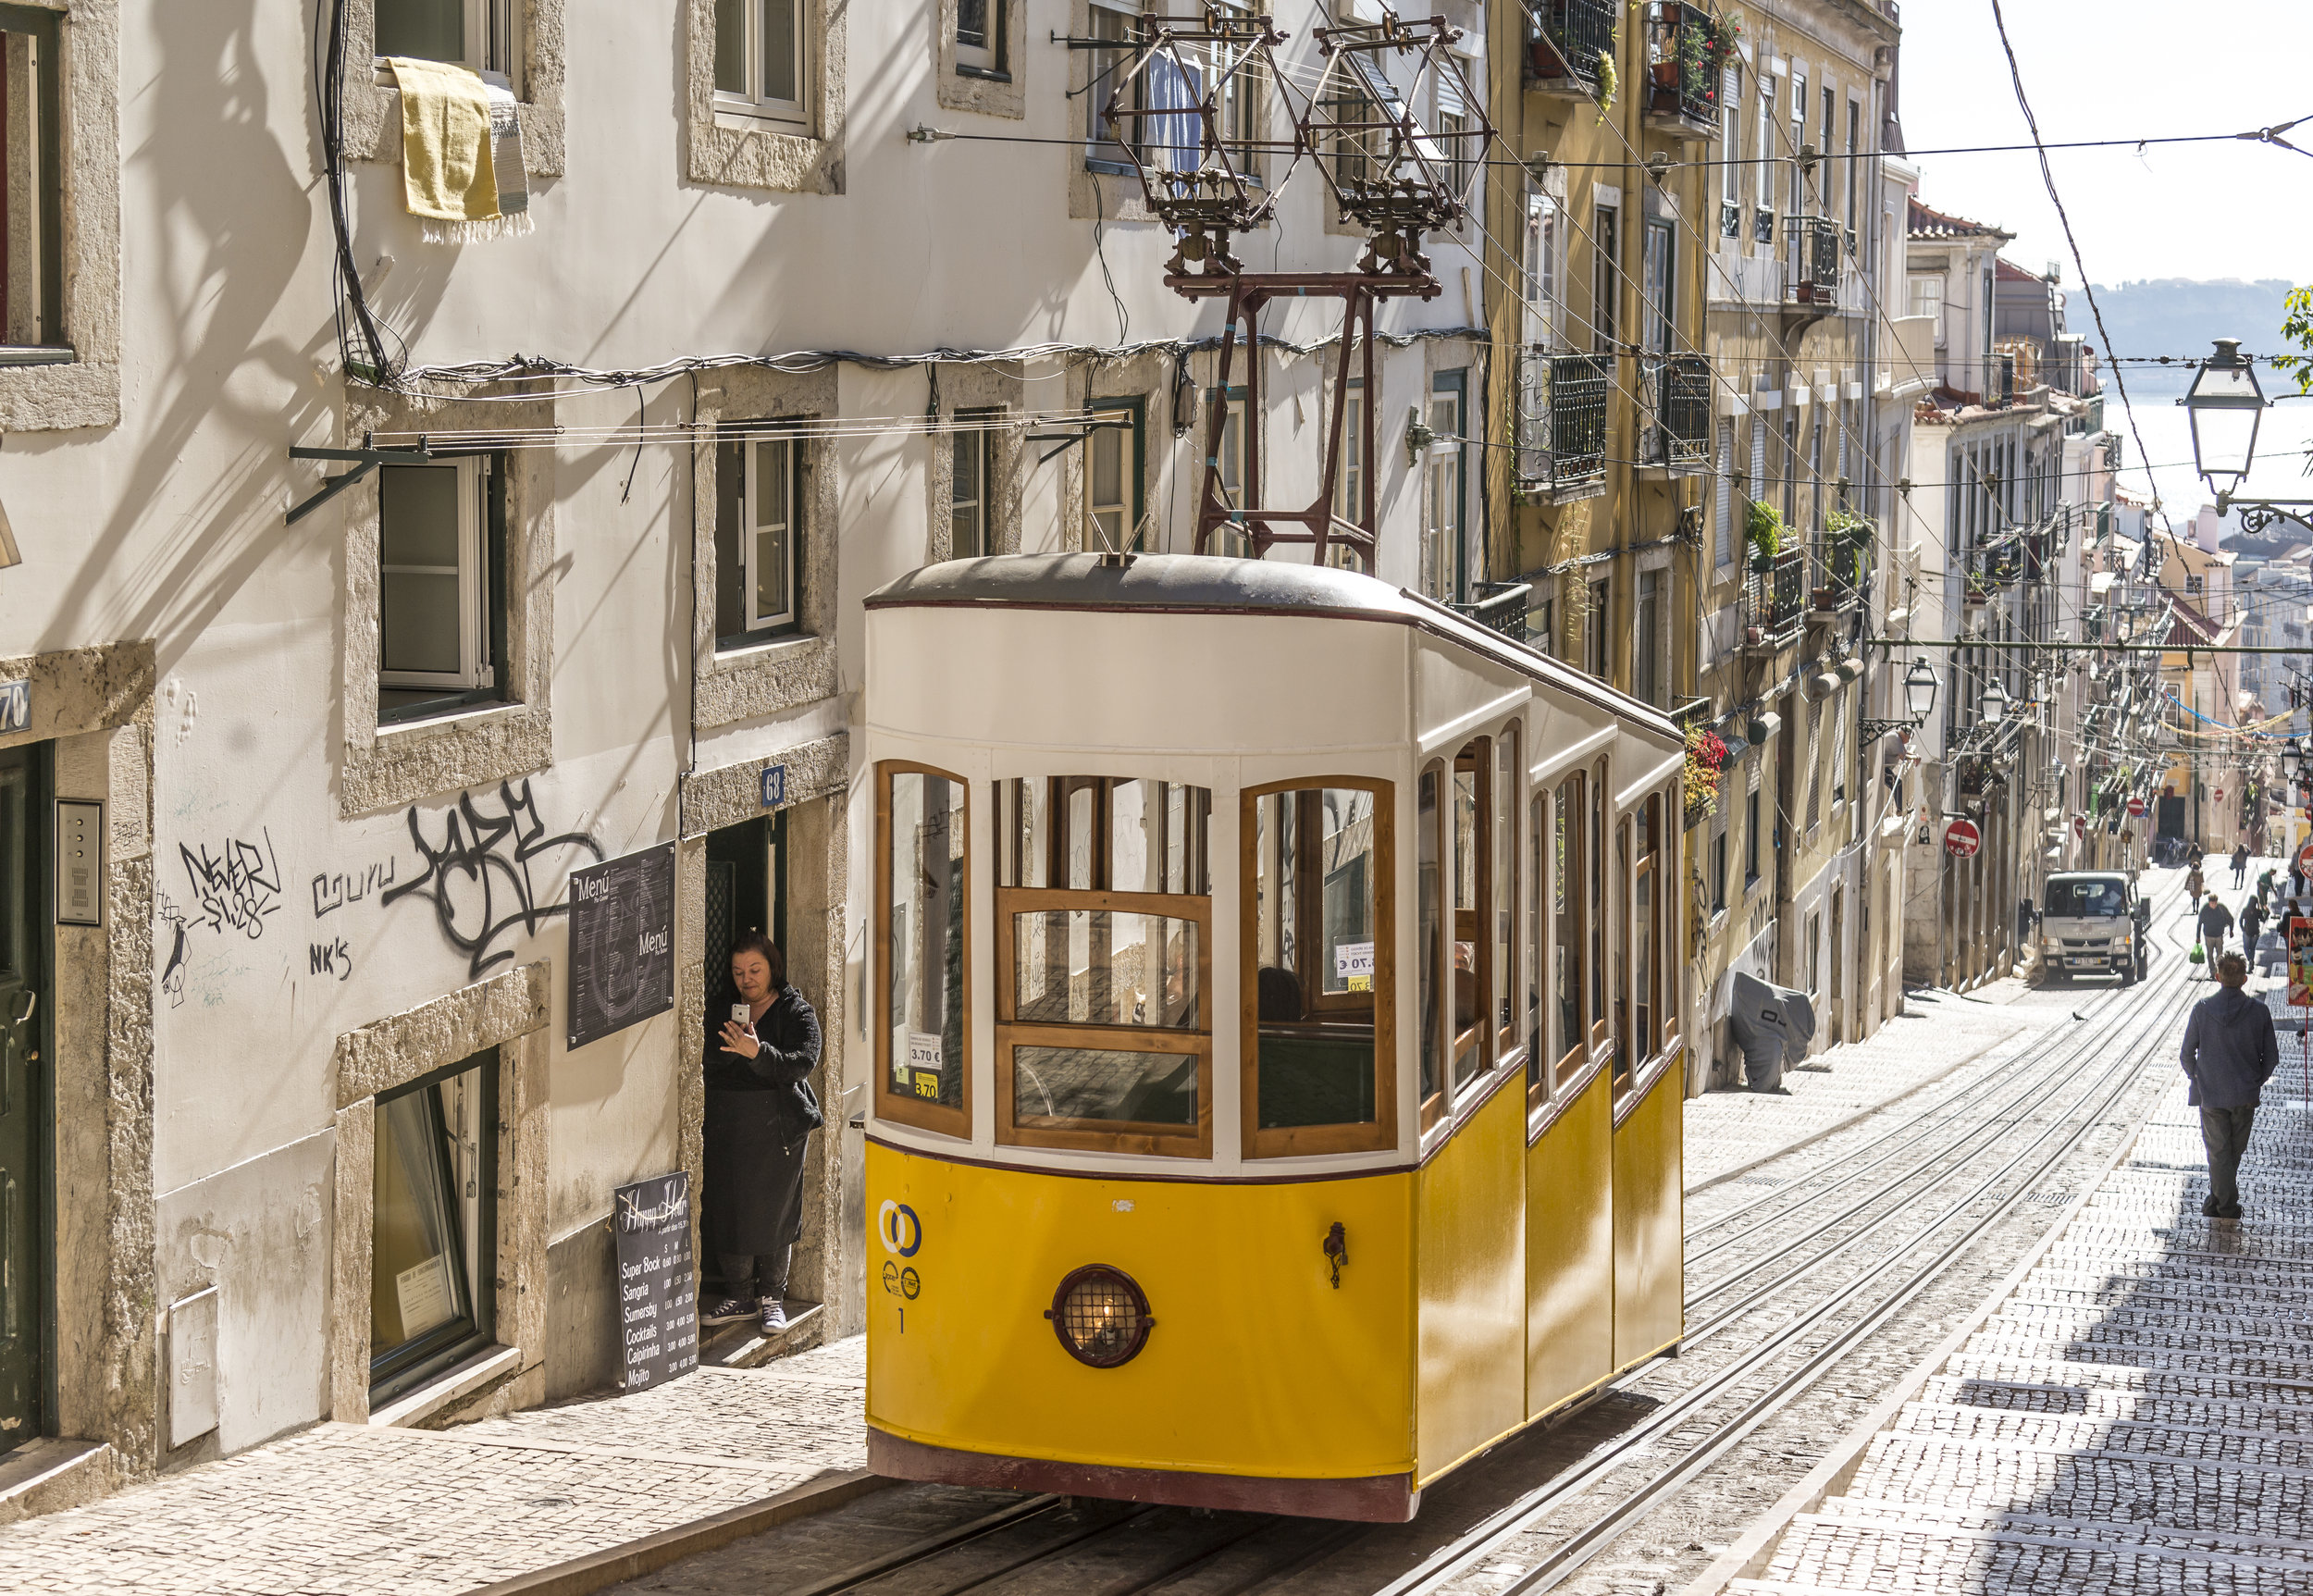  A view towards the tram in central Lisbon. 